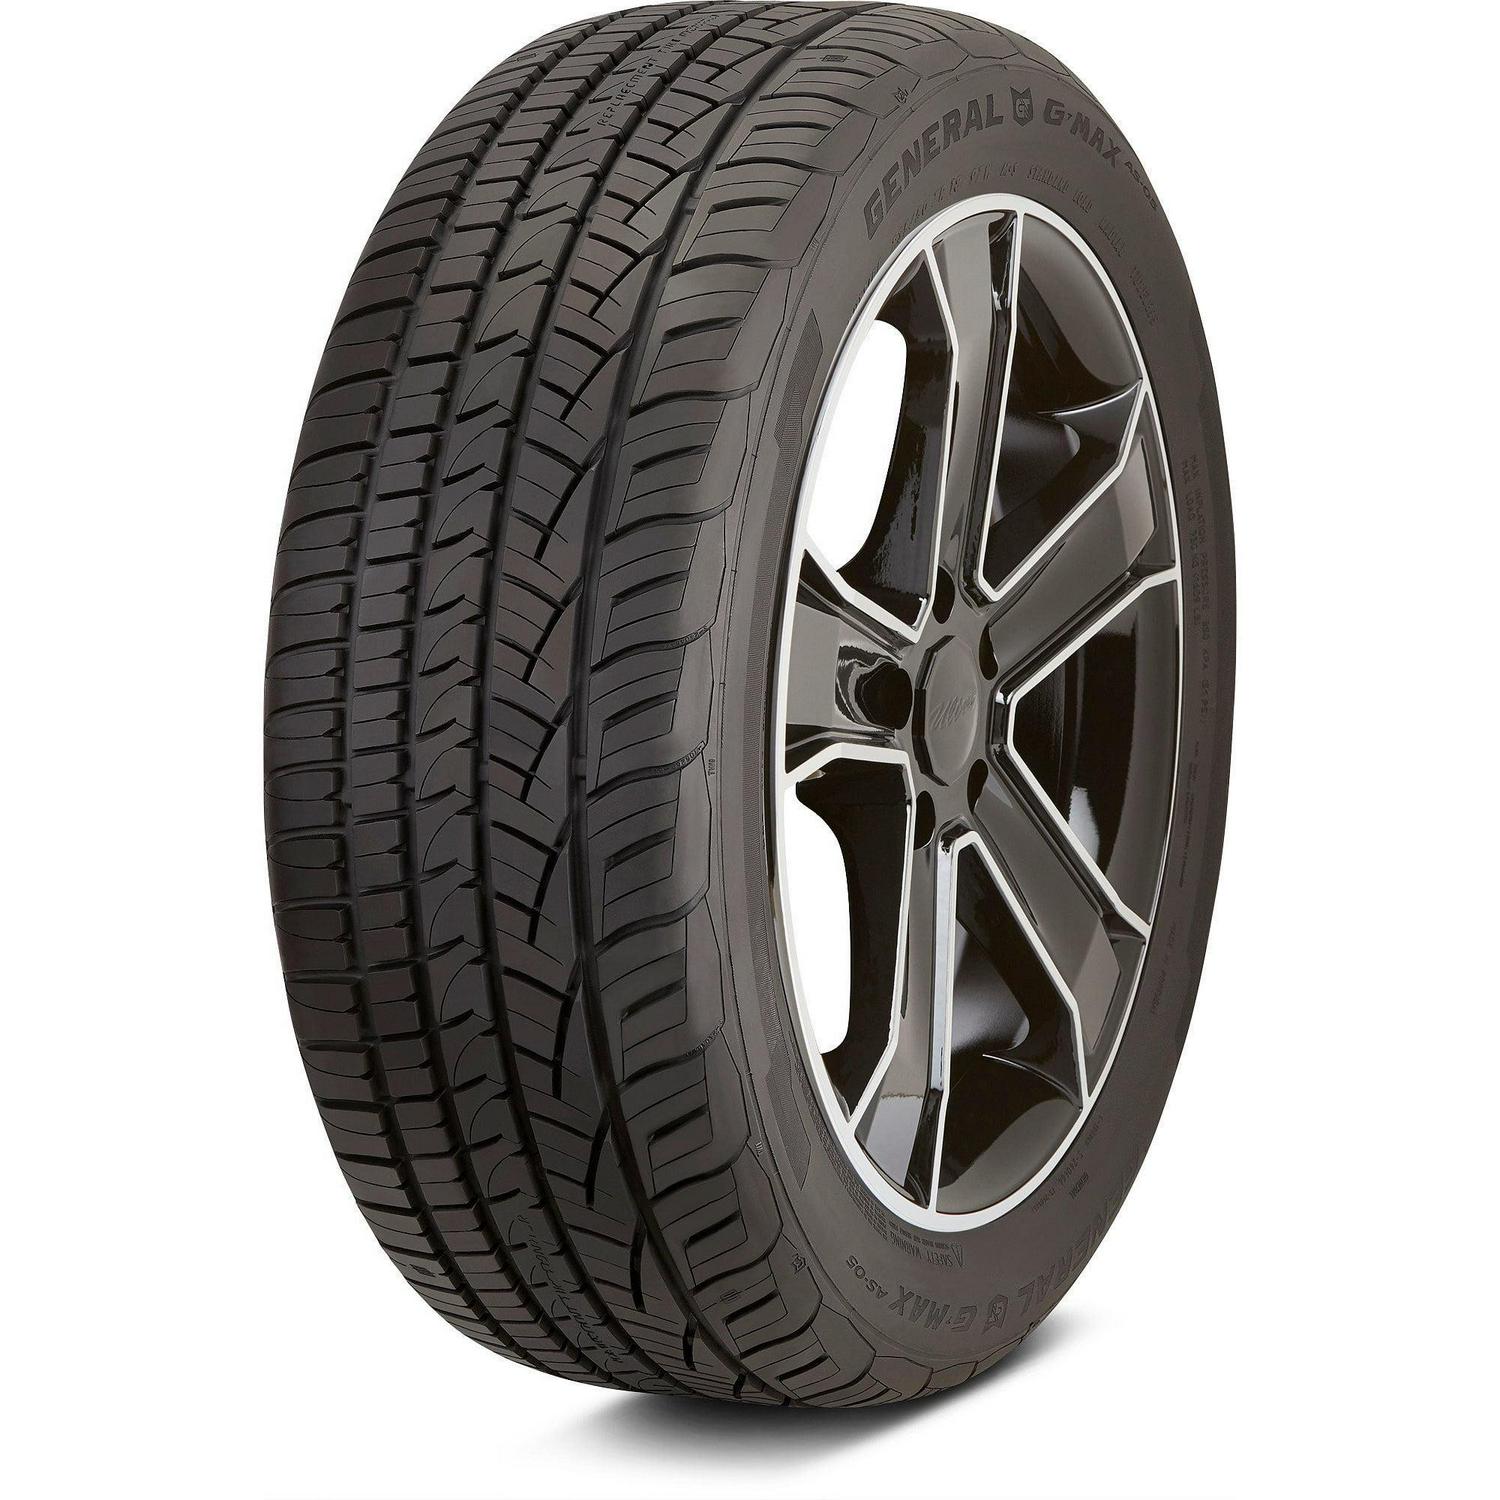 General Tire Ultra High Performance G-Max AS-05 245/55R18 103W Tire